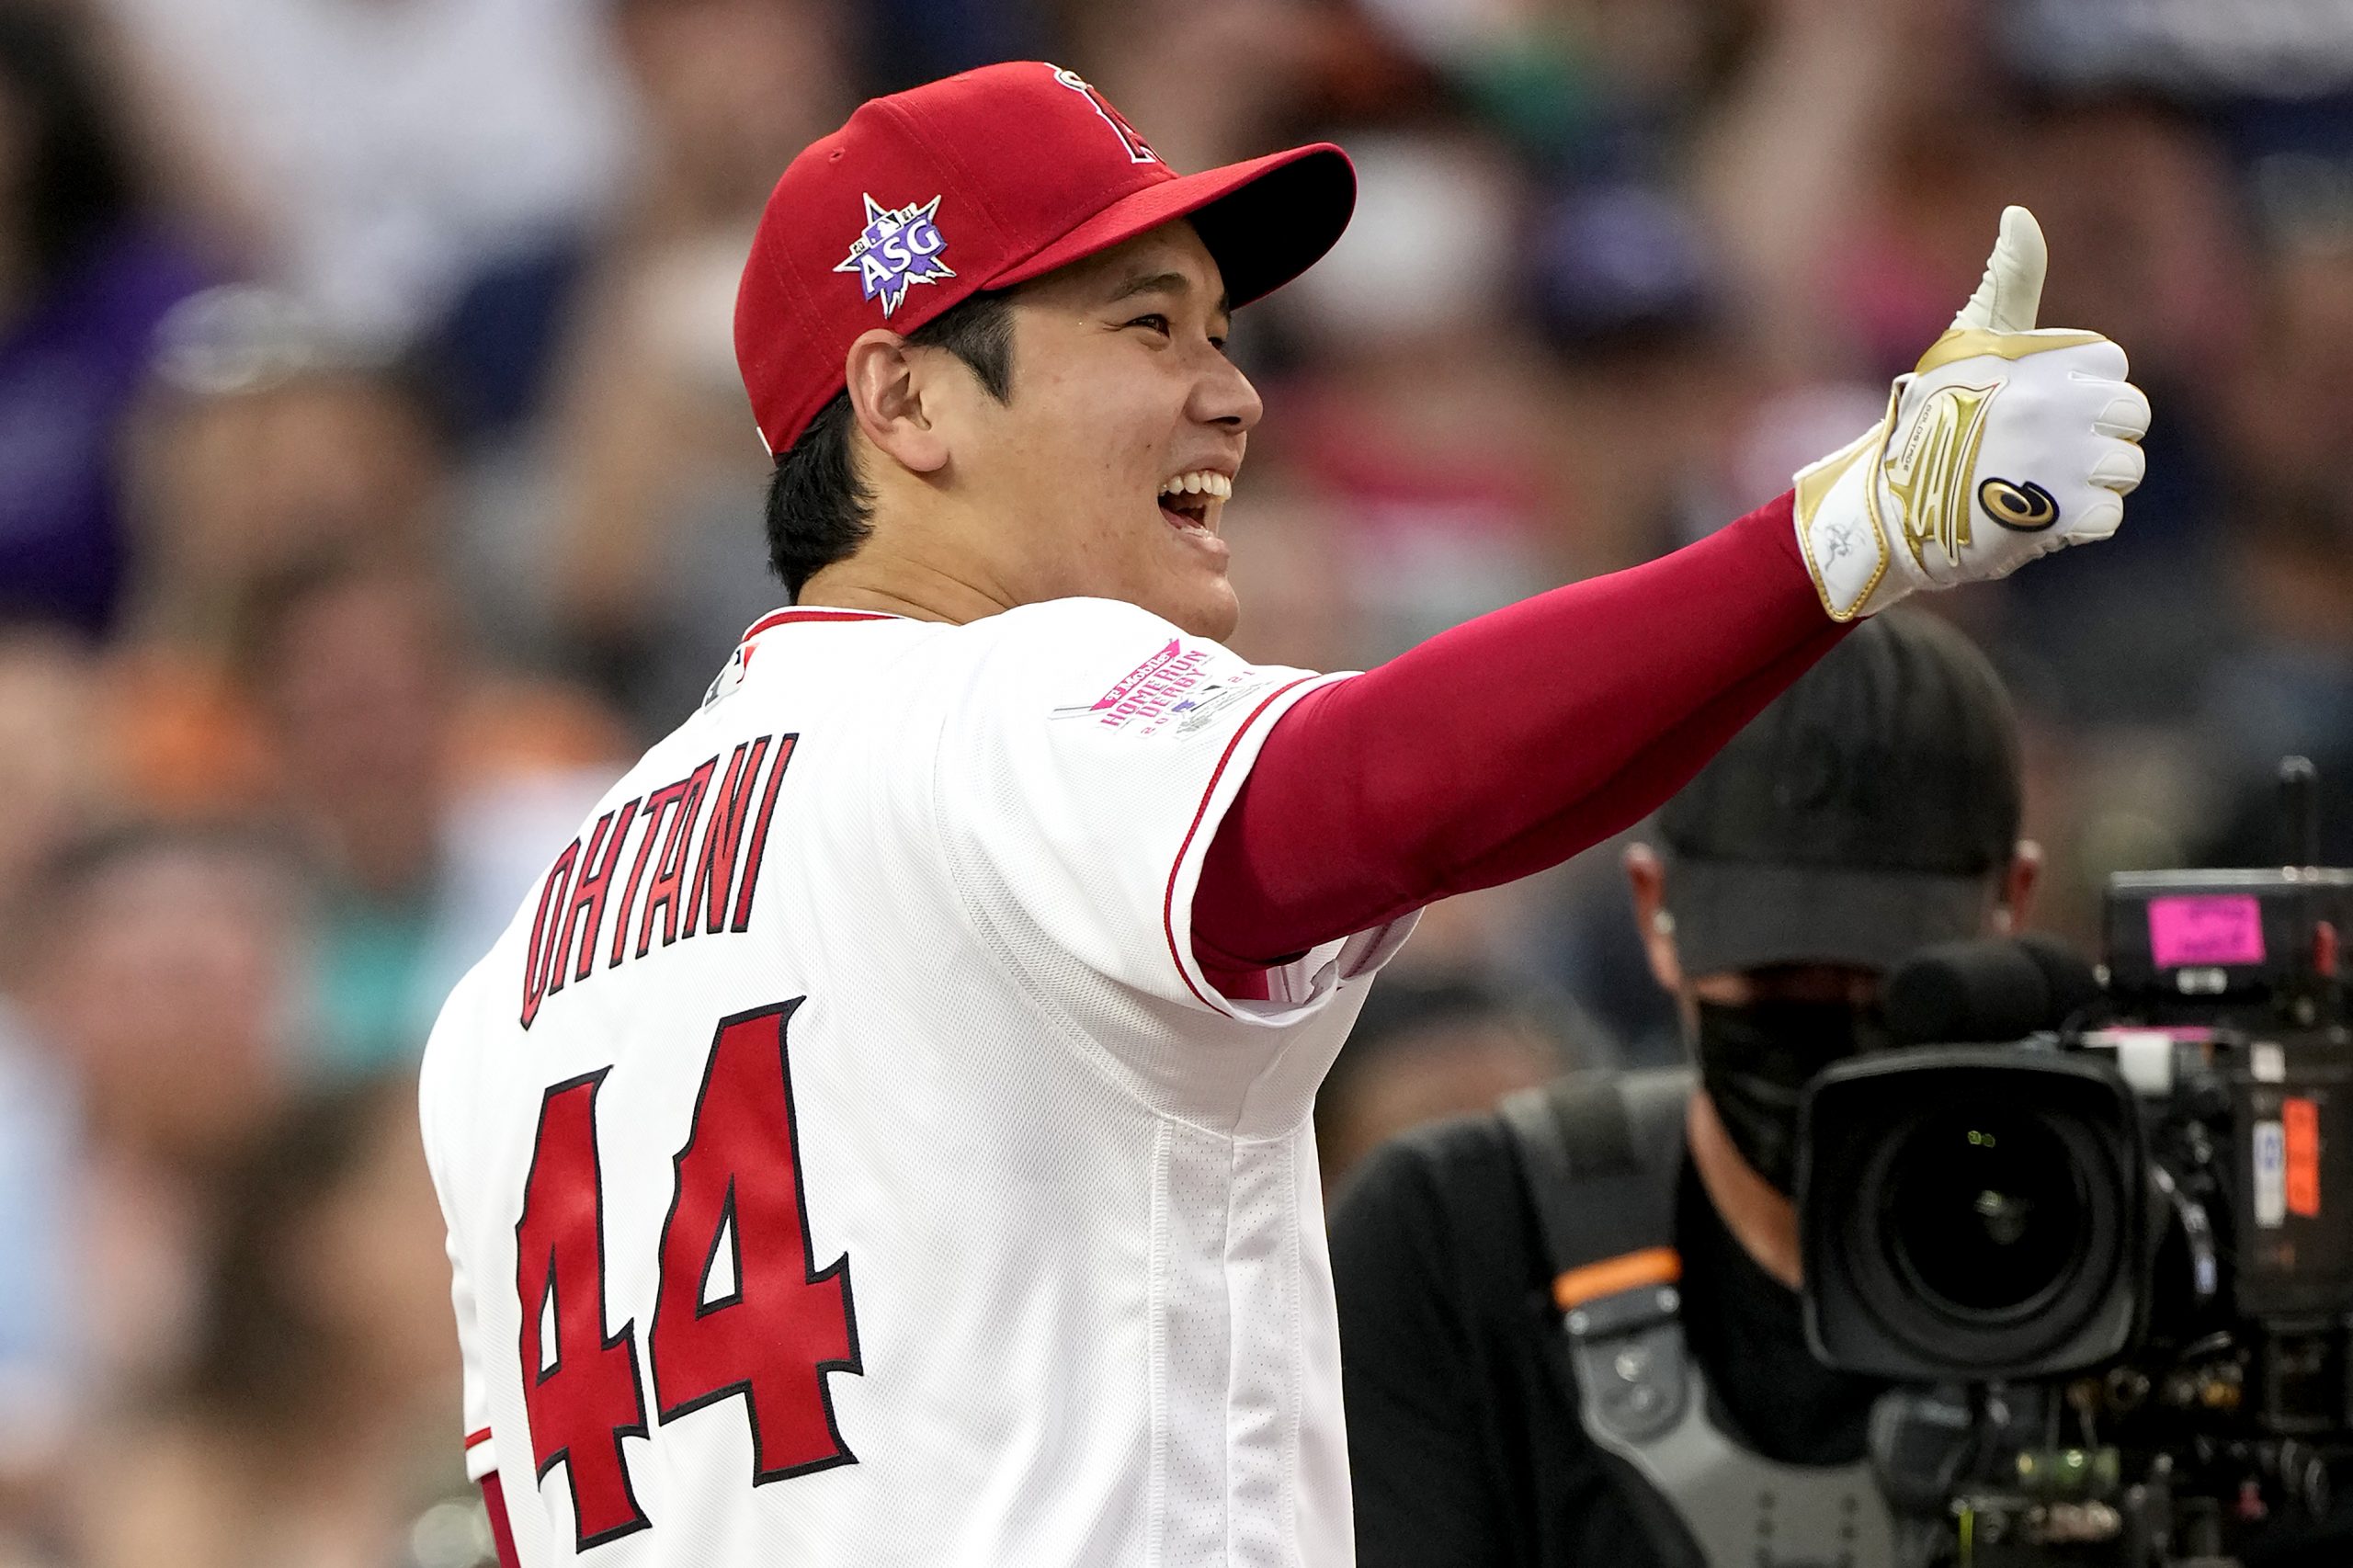 Shohei Ohtani rivals Babe Ruth as an all time great, says MLB historian